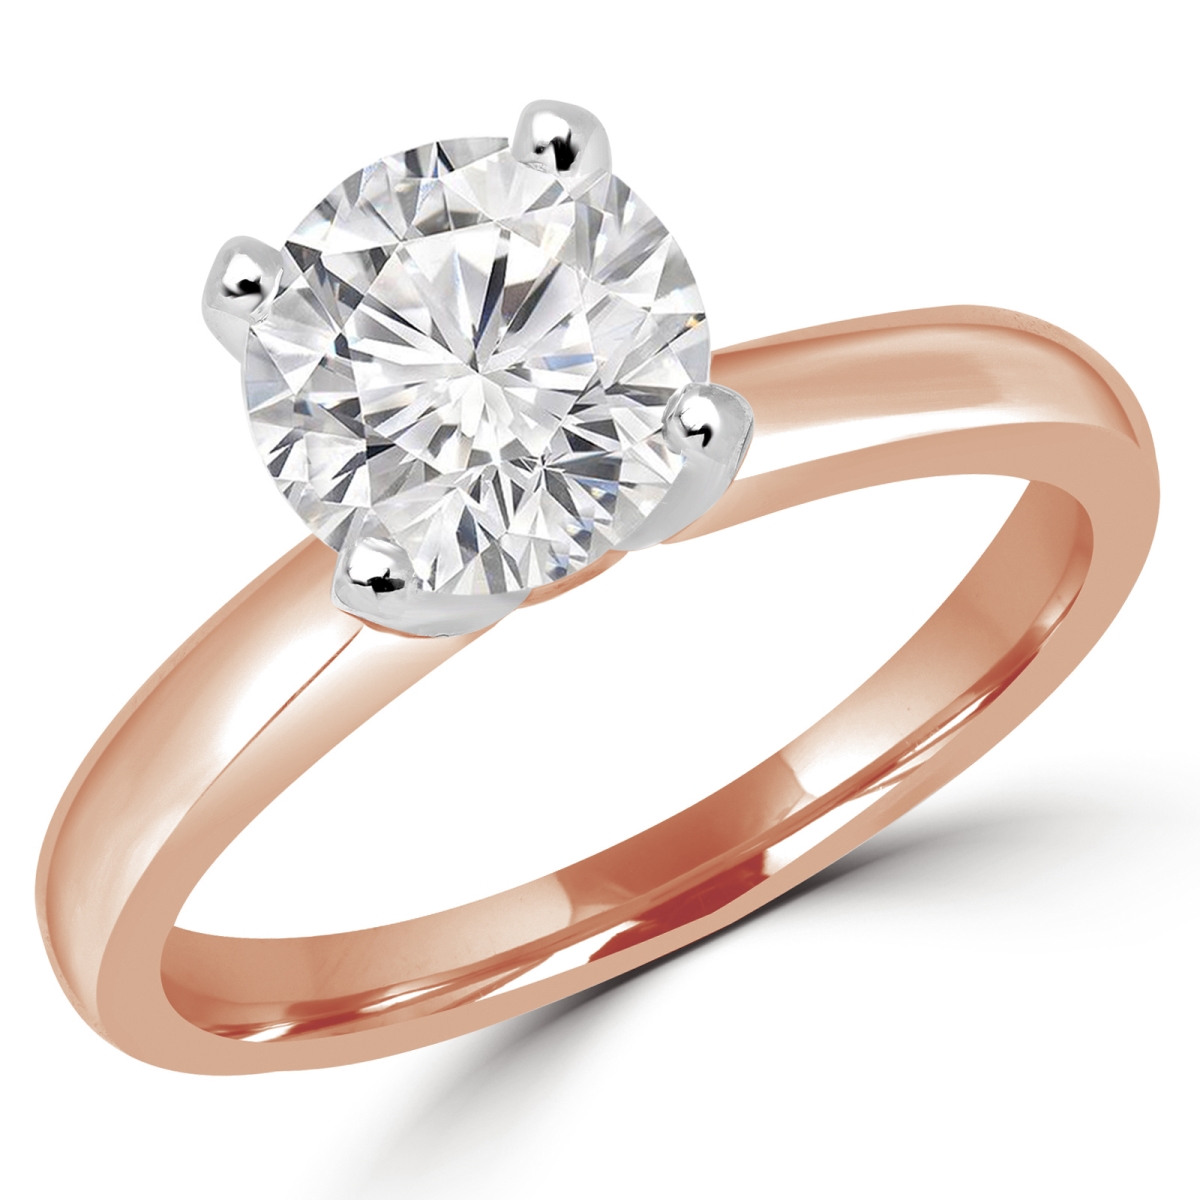 Picture of Majesty Diamonds MD180009-8 0.6 CT Round Diamond Solitaire Engagement Ring in 14K Rose Gold - Size 8